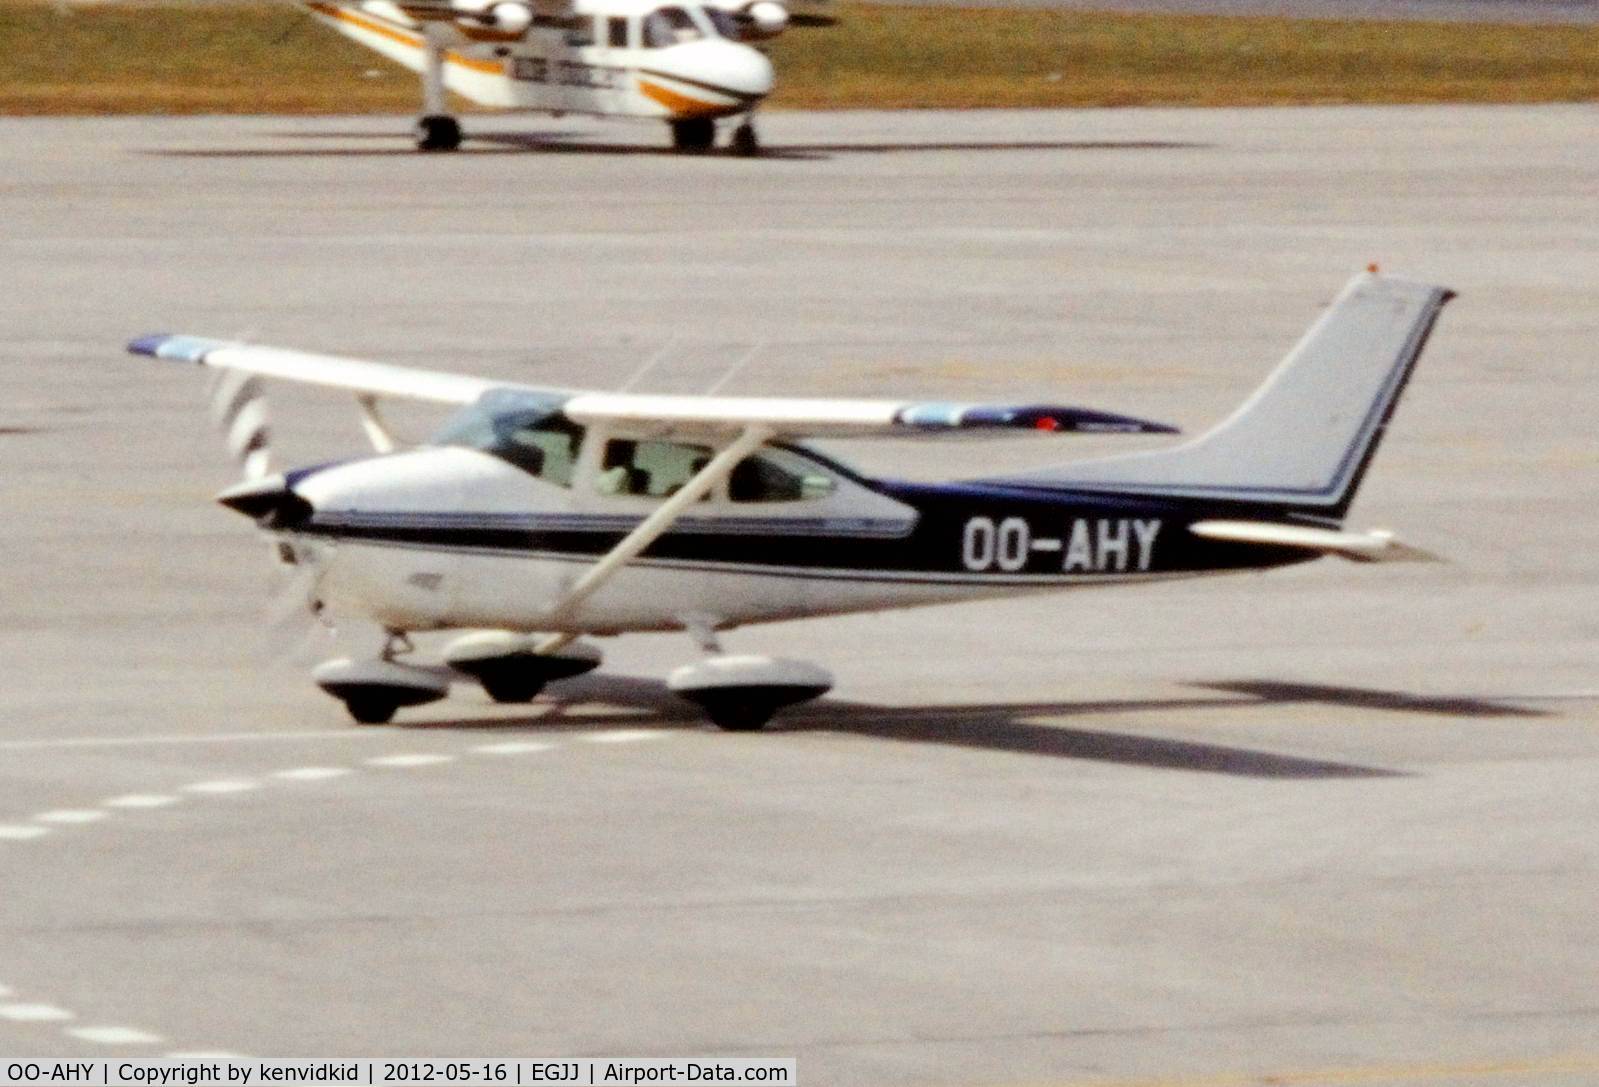 OO-AHY, 1972 Cessna 182P Skylane C/N 18261644, At Jersey airport early 1970's.
Scanned from slide.